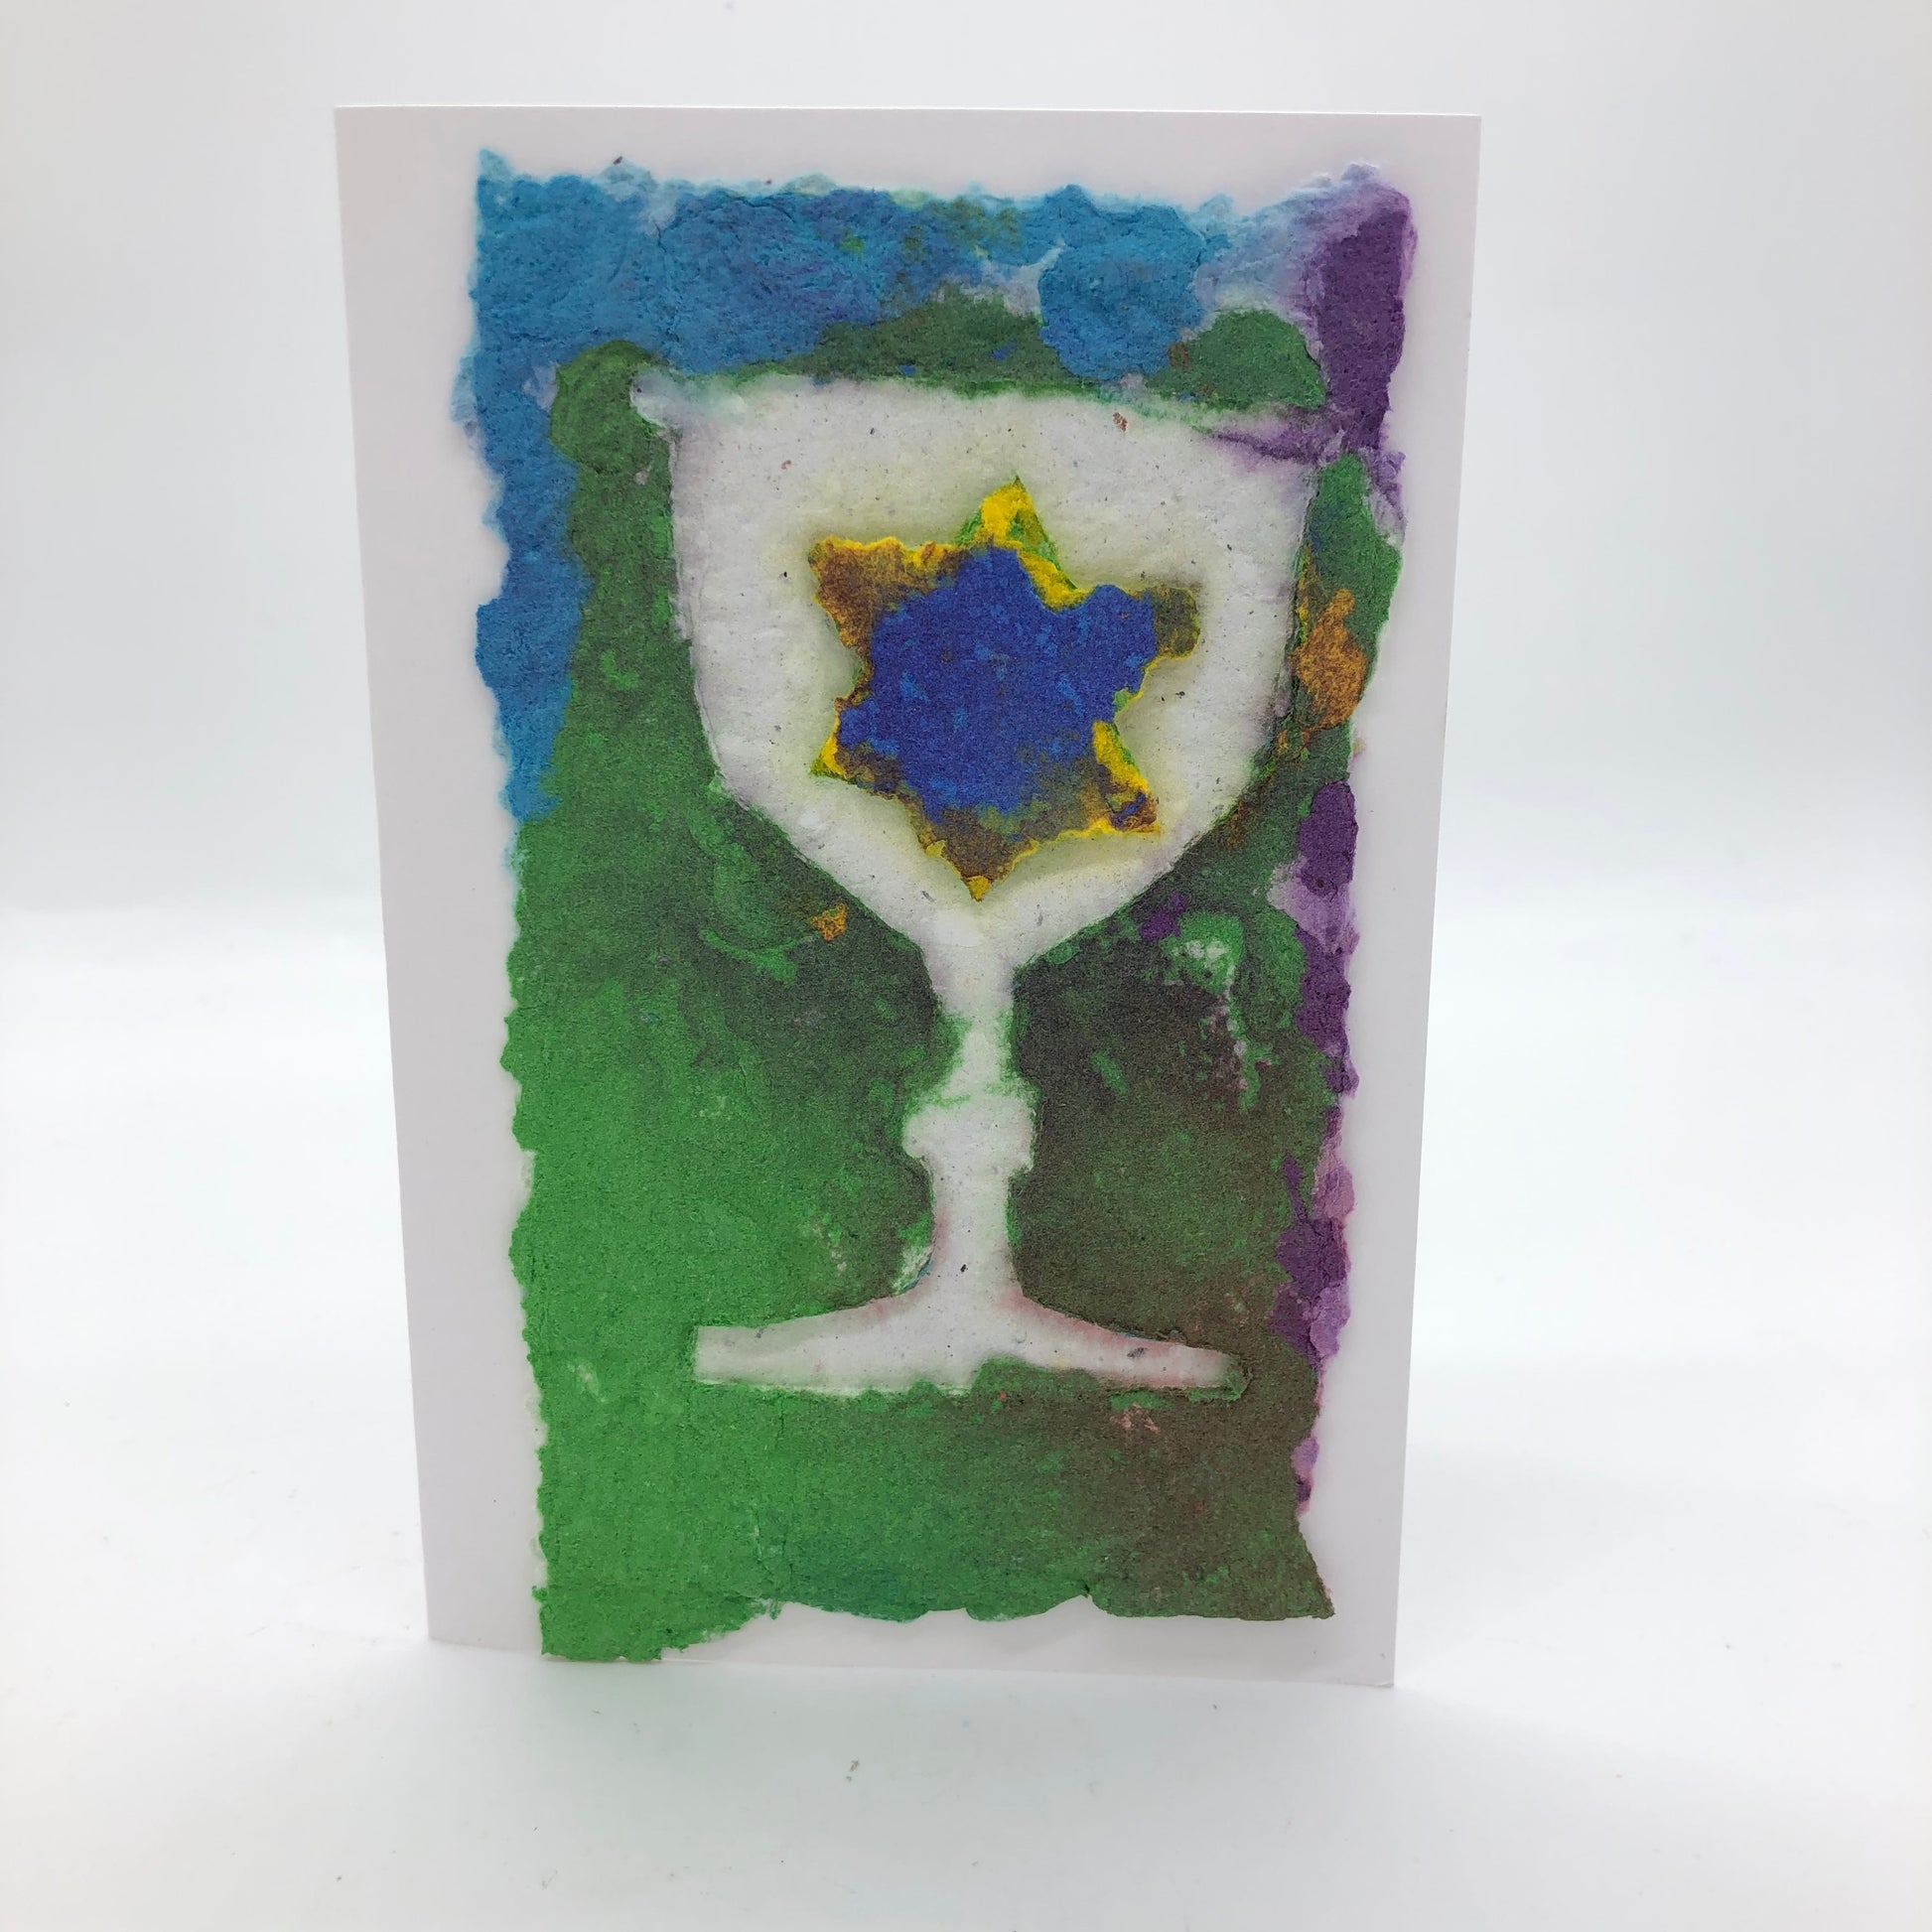 Handmade paper greeting card with white Kiddush cup and yellow/blue Jewish star against green, purple and light blue background